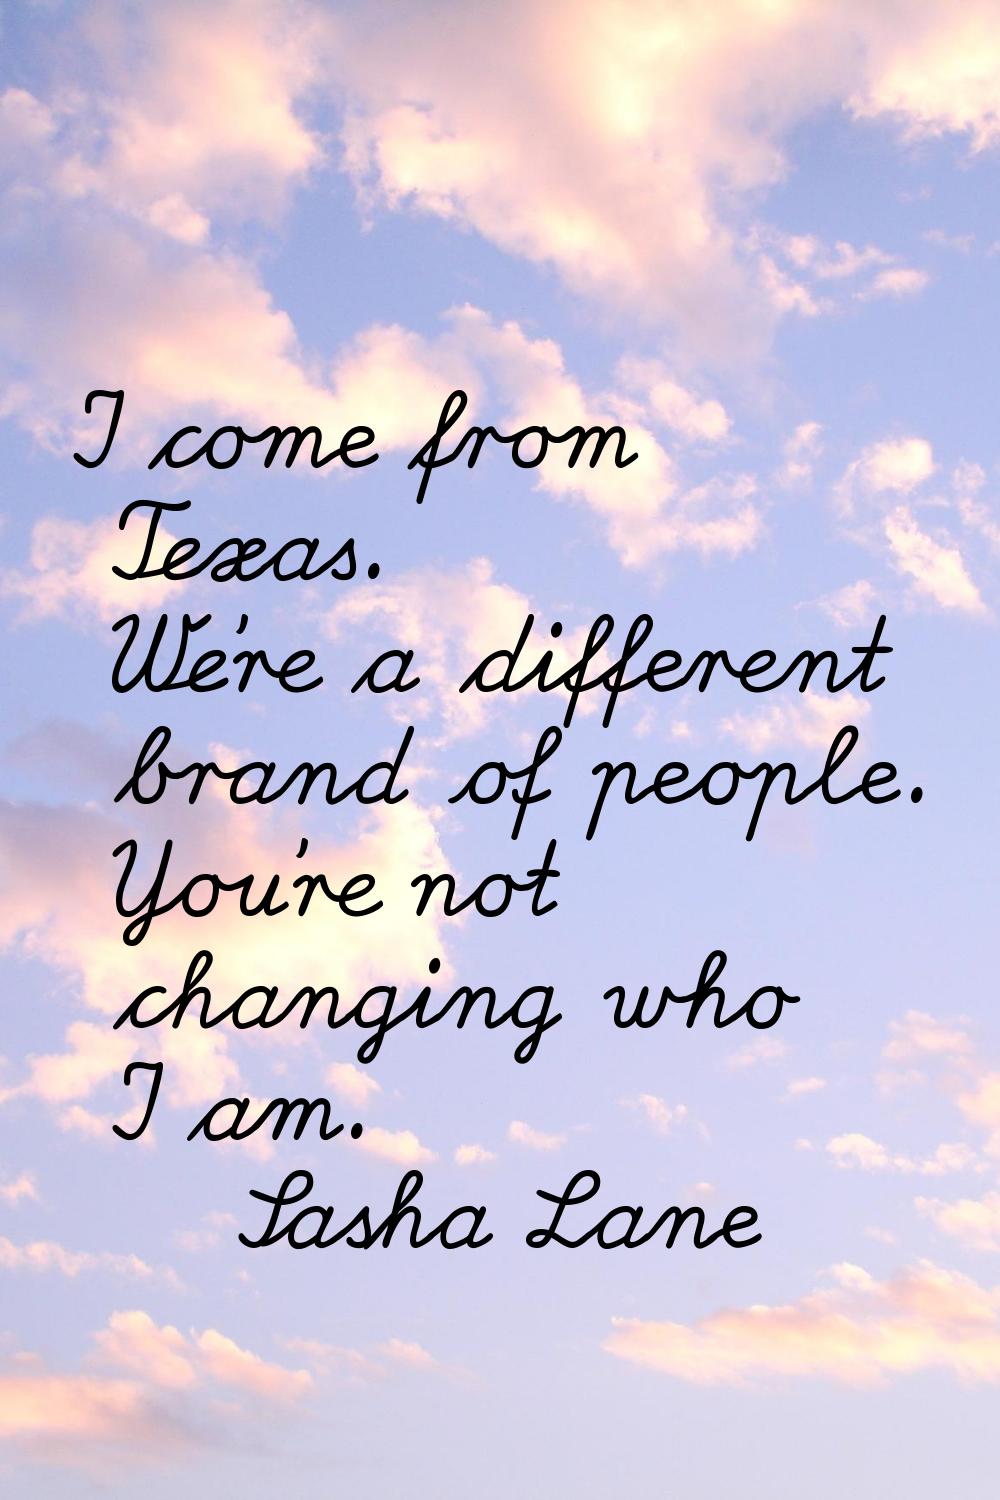 I come from Texas. We're a different brand of people. You're not changing who I am.